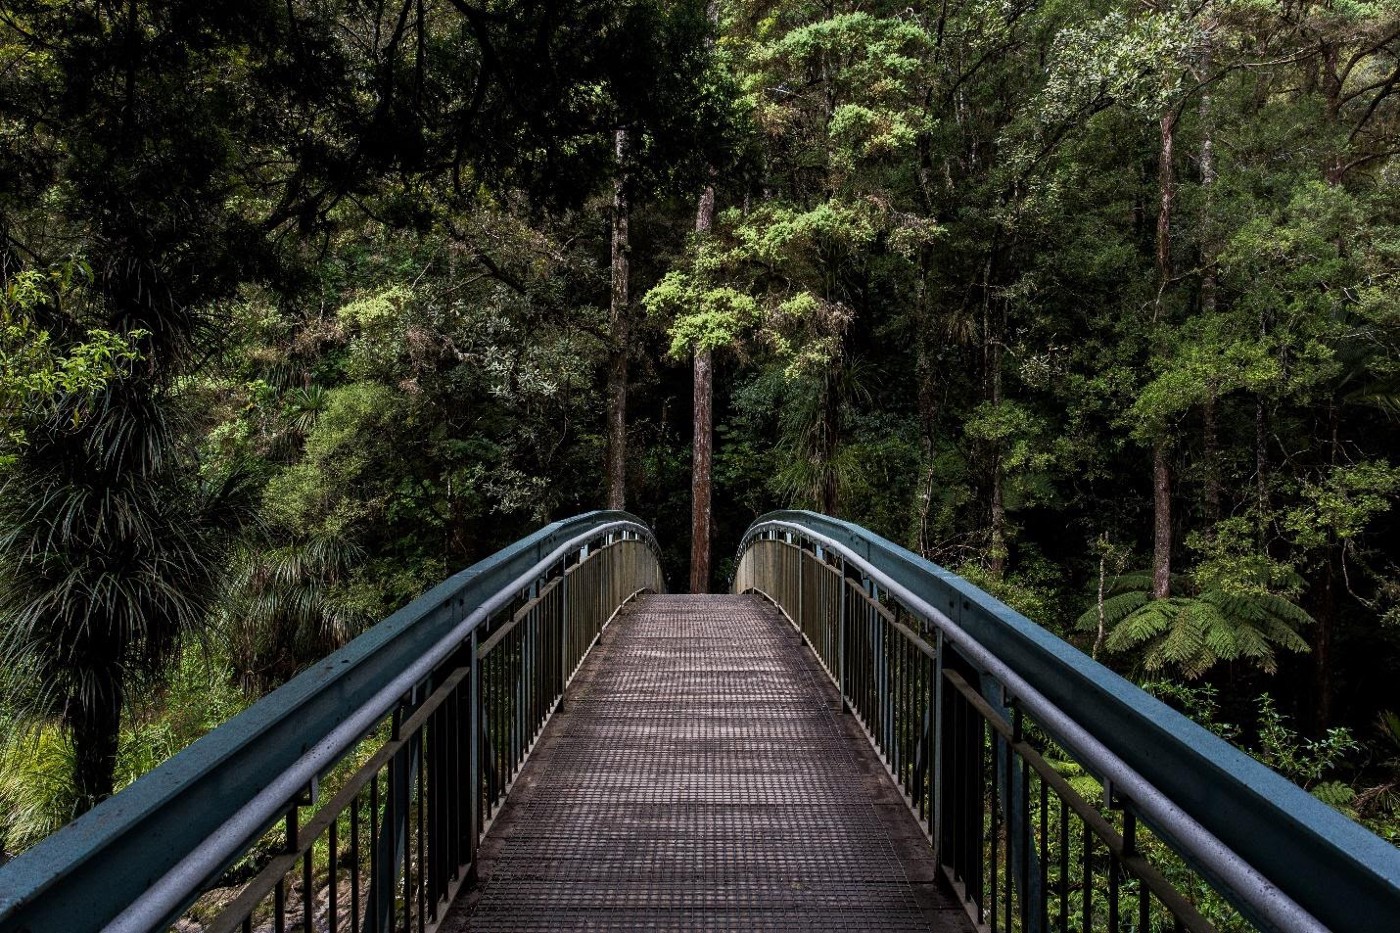 An image of a bridge with trees.